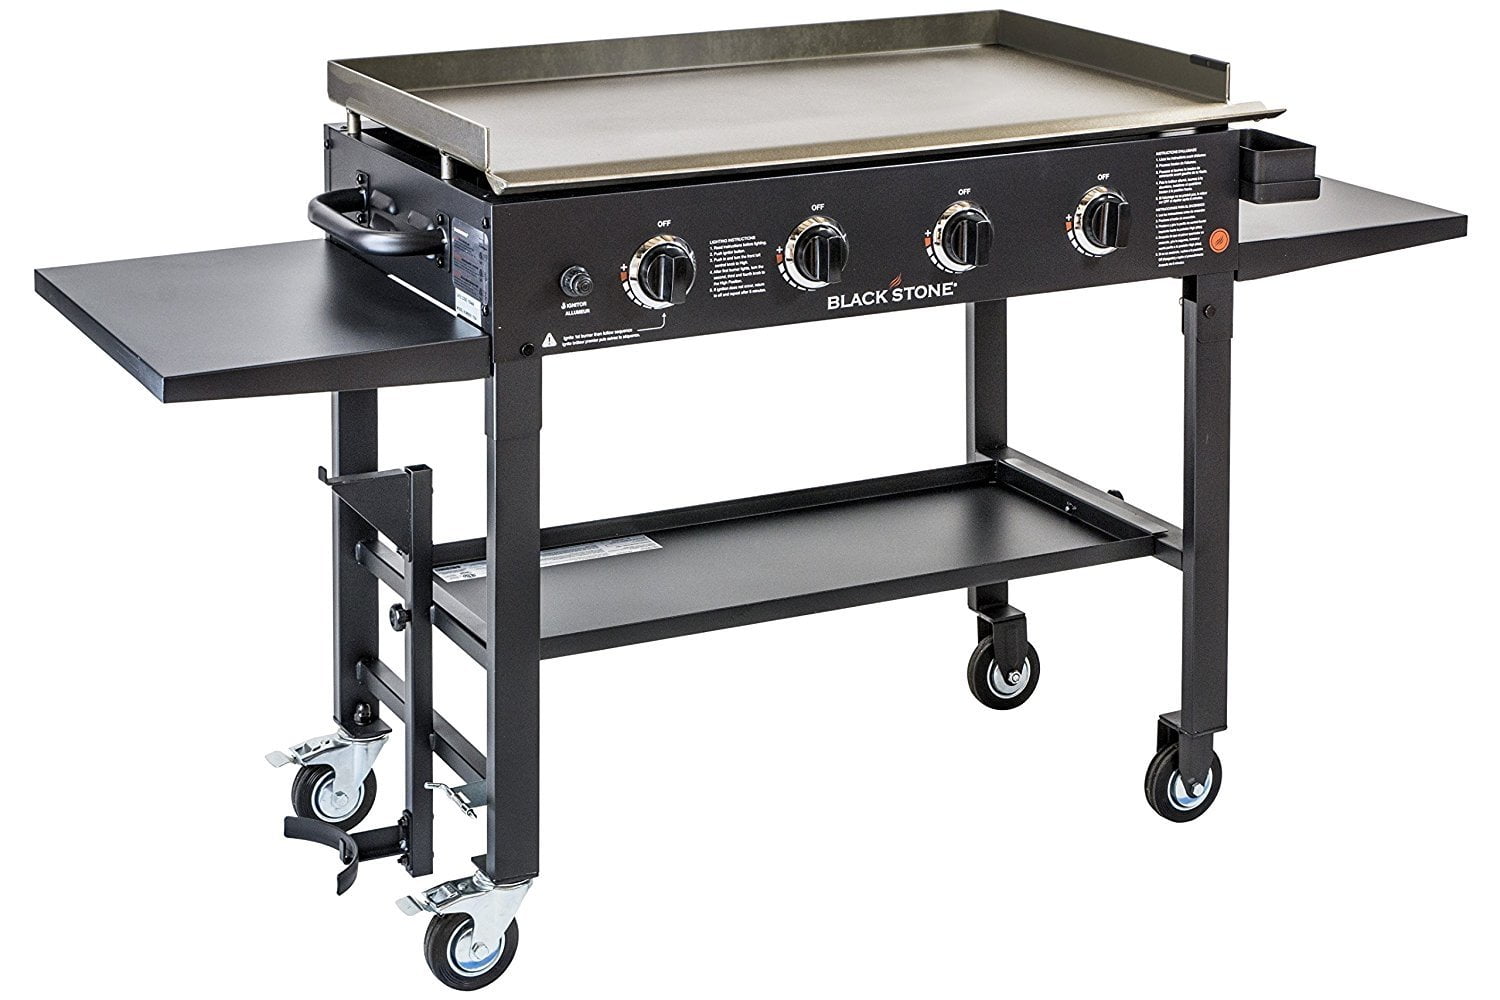 Propane Fueled Blackstone 28 inch Outdoor Flat Top Gas Grill Griddle Station Restaurant Grade Professional Quality with Griddle Tool Kit 2-burner 